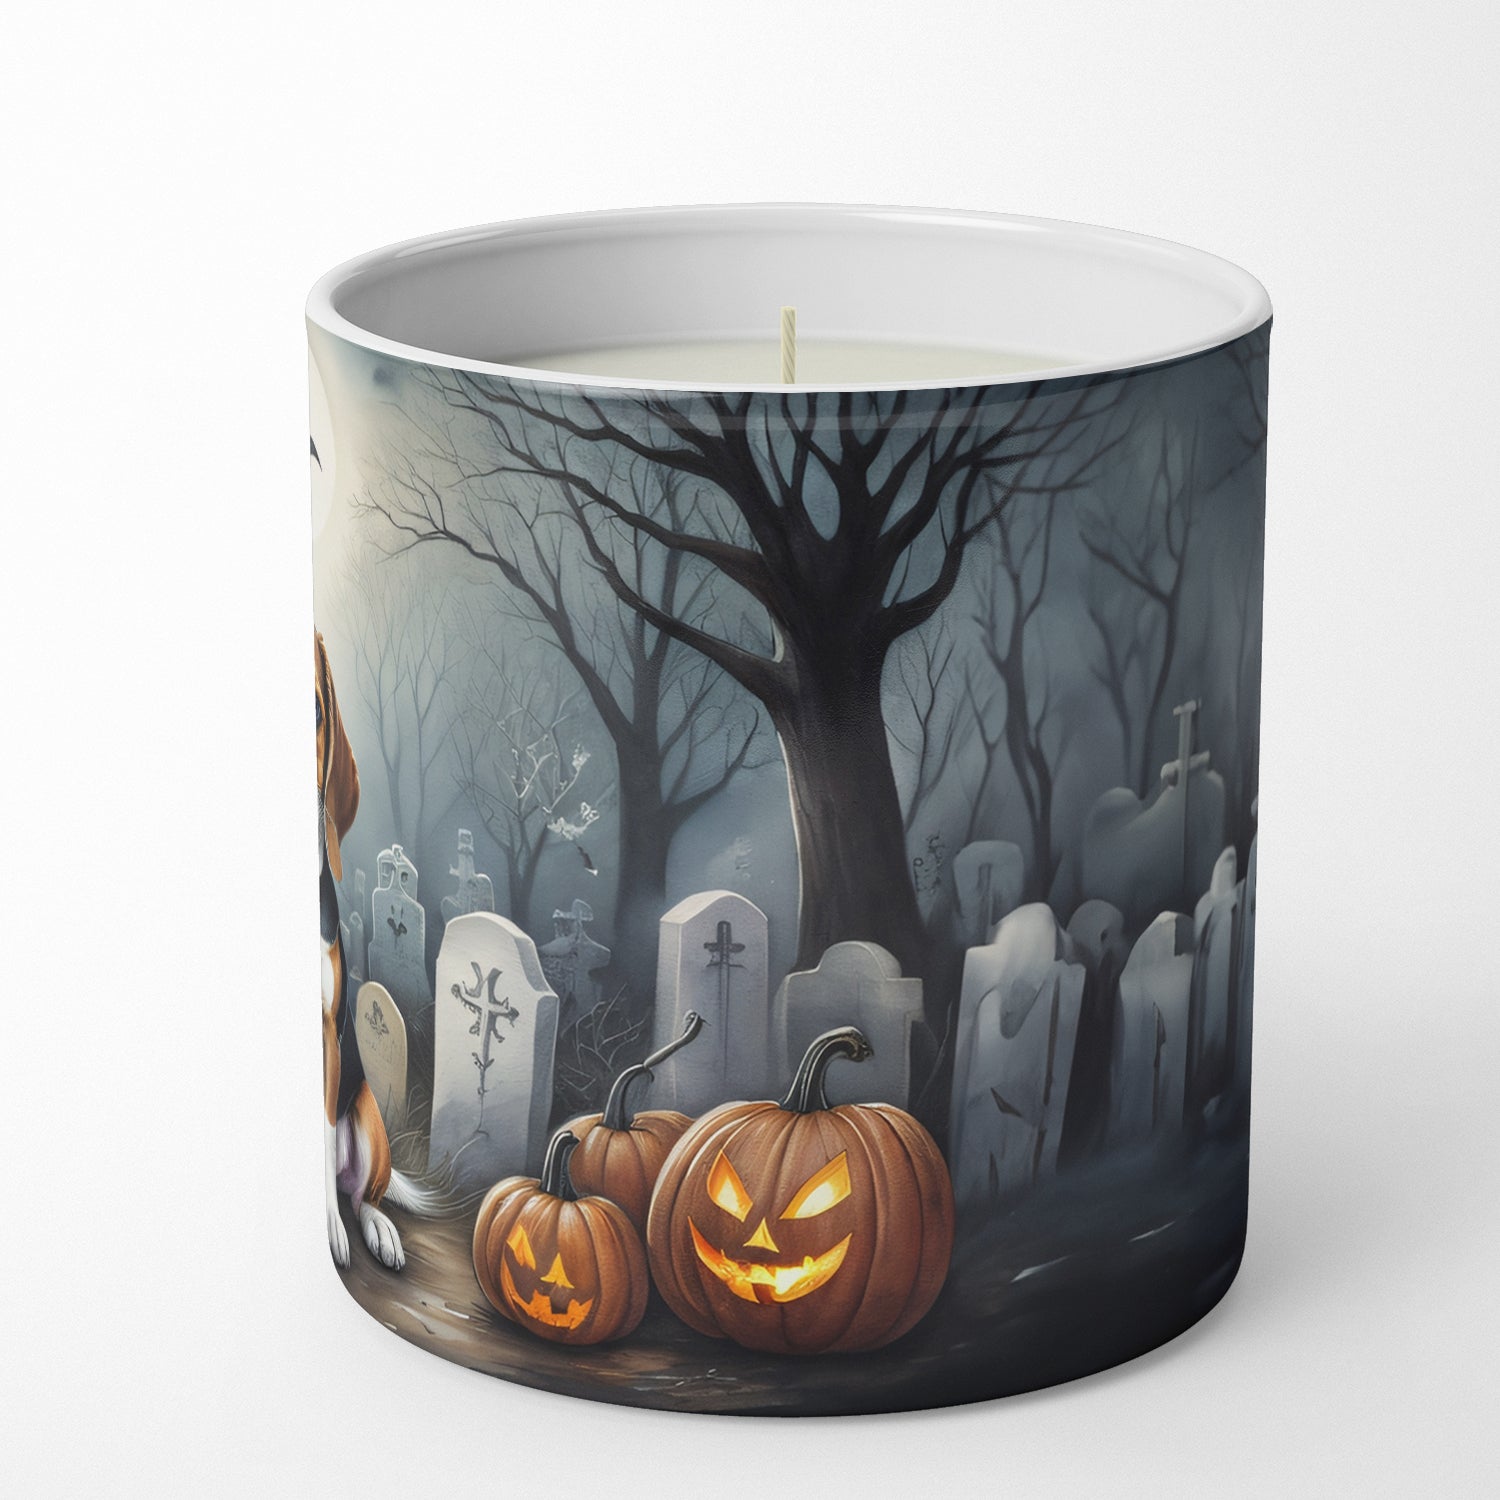 Beagle Spooky Halloween Decorative Soy Candle